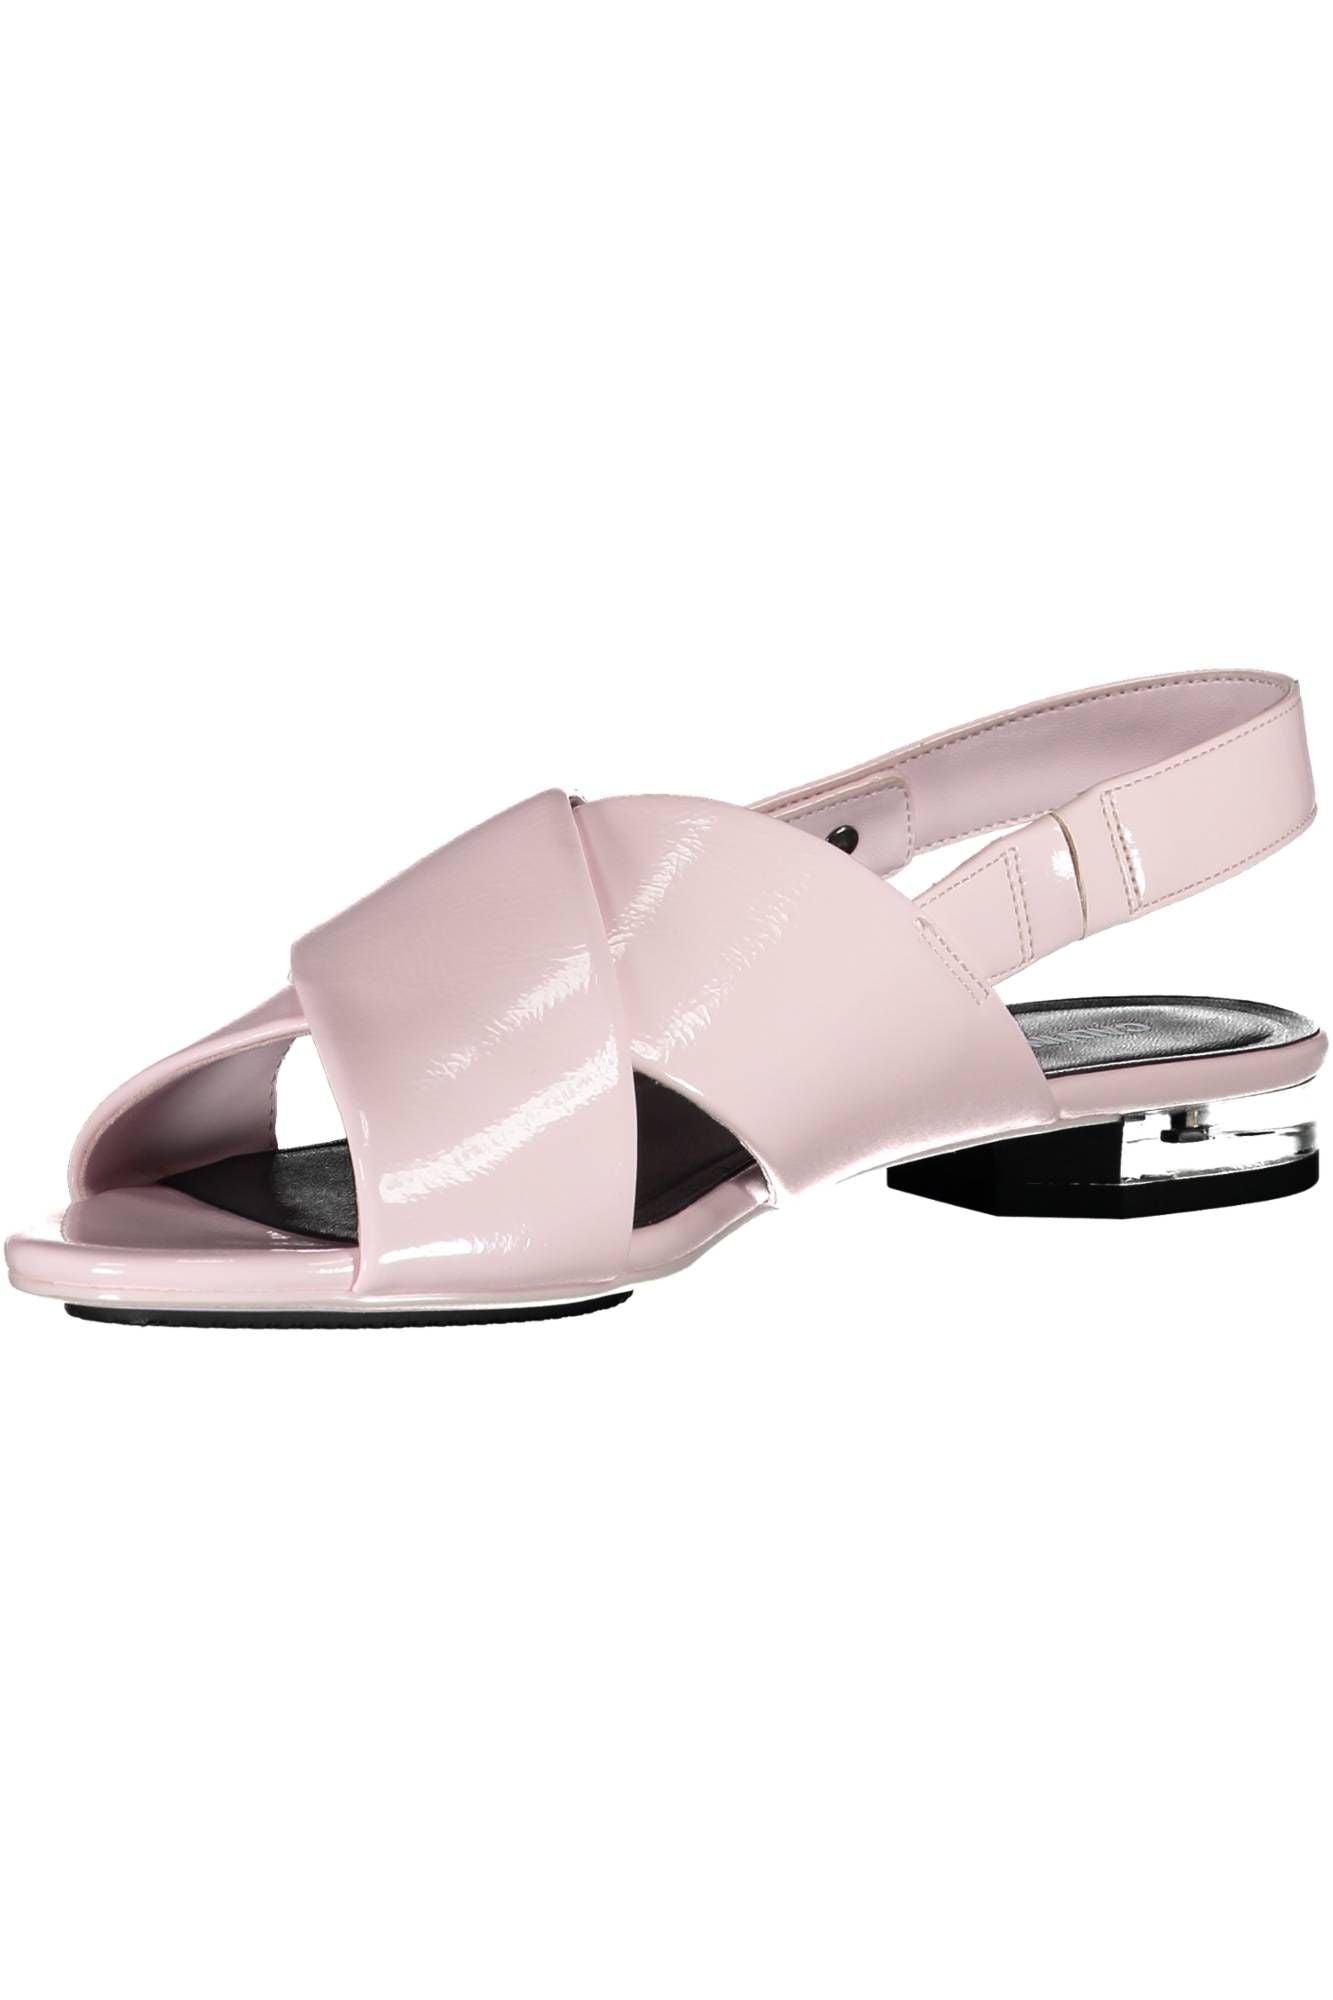 Chic Pink Cross-Front Flat Sandals